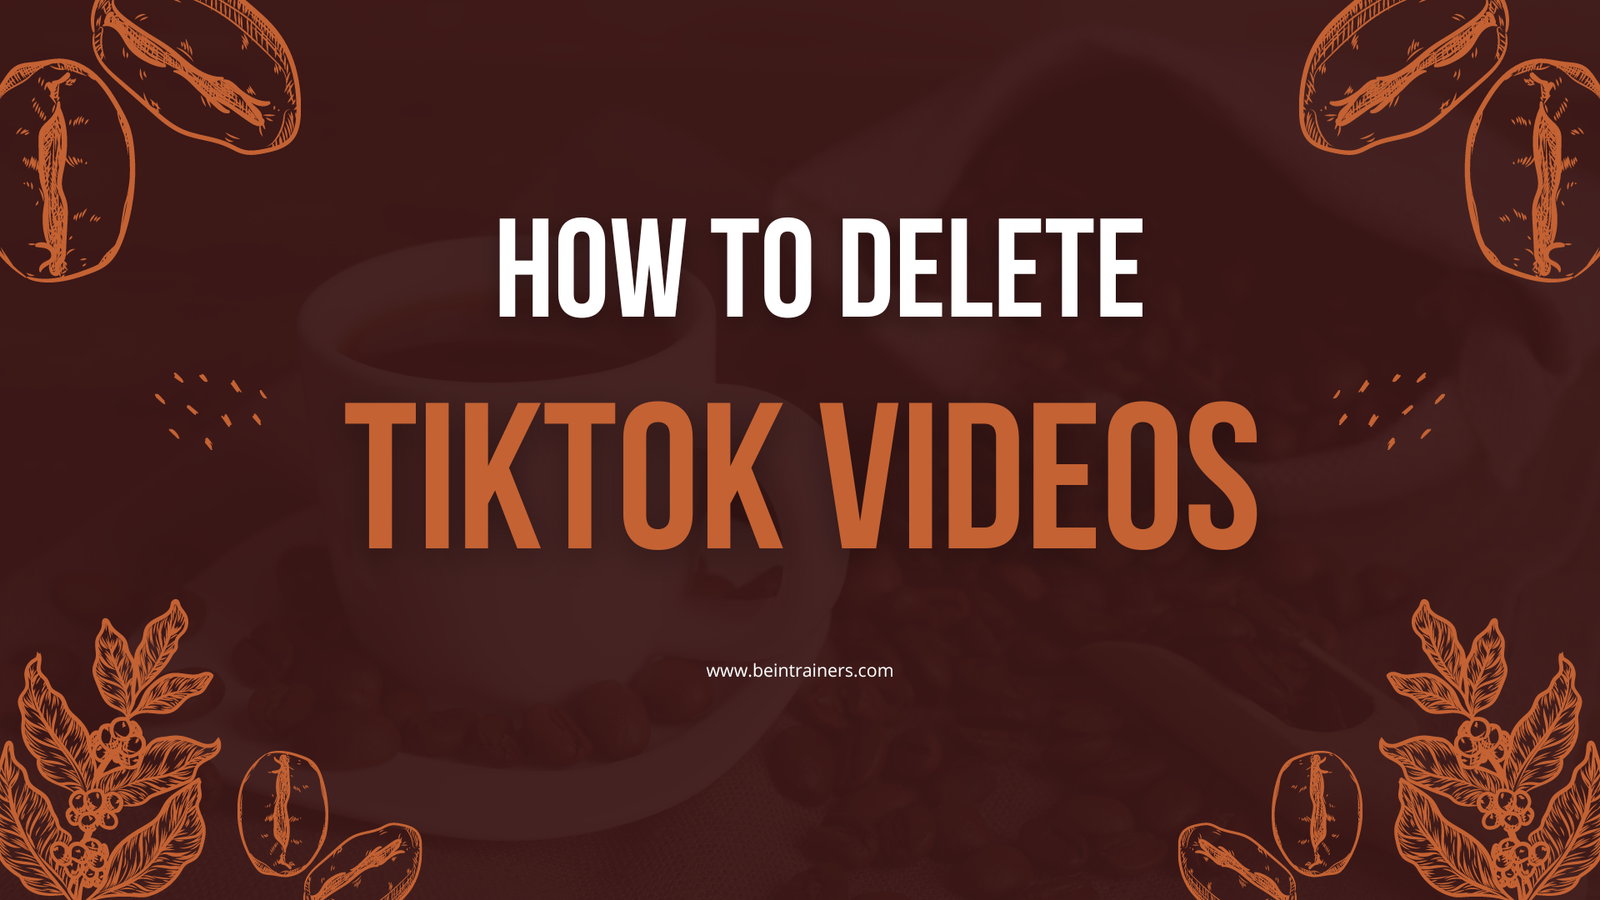 How To Delete Tiktok Videos? And How To Download?